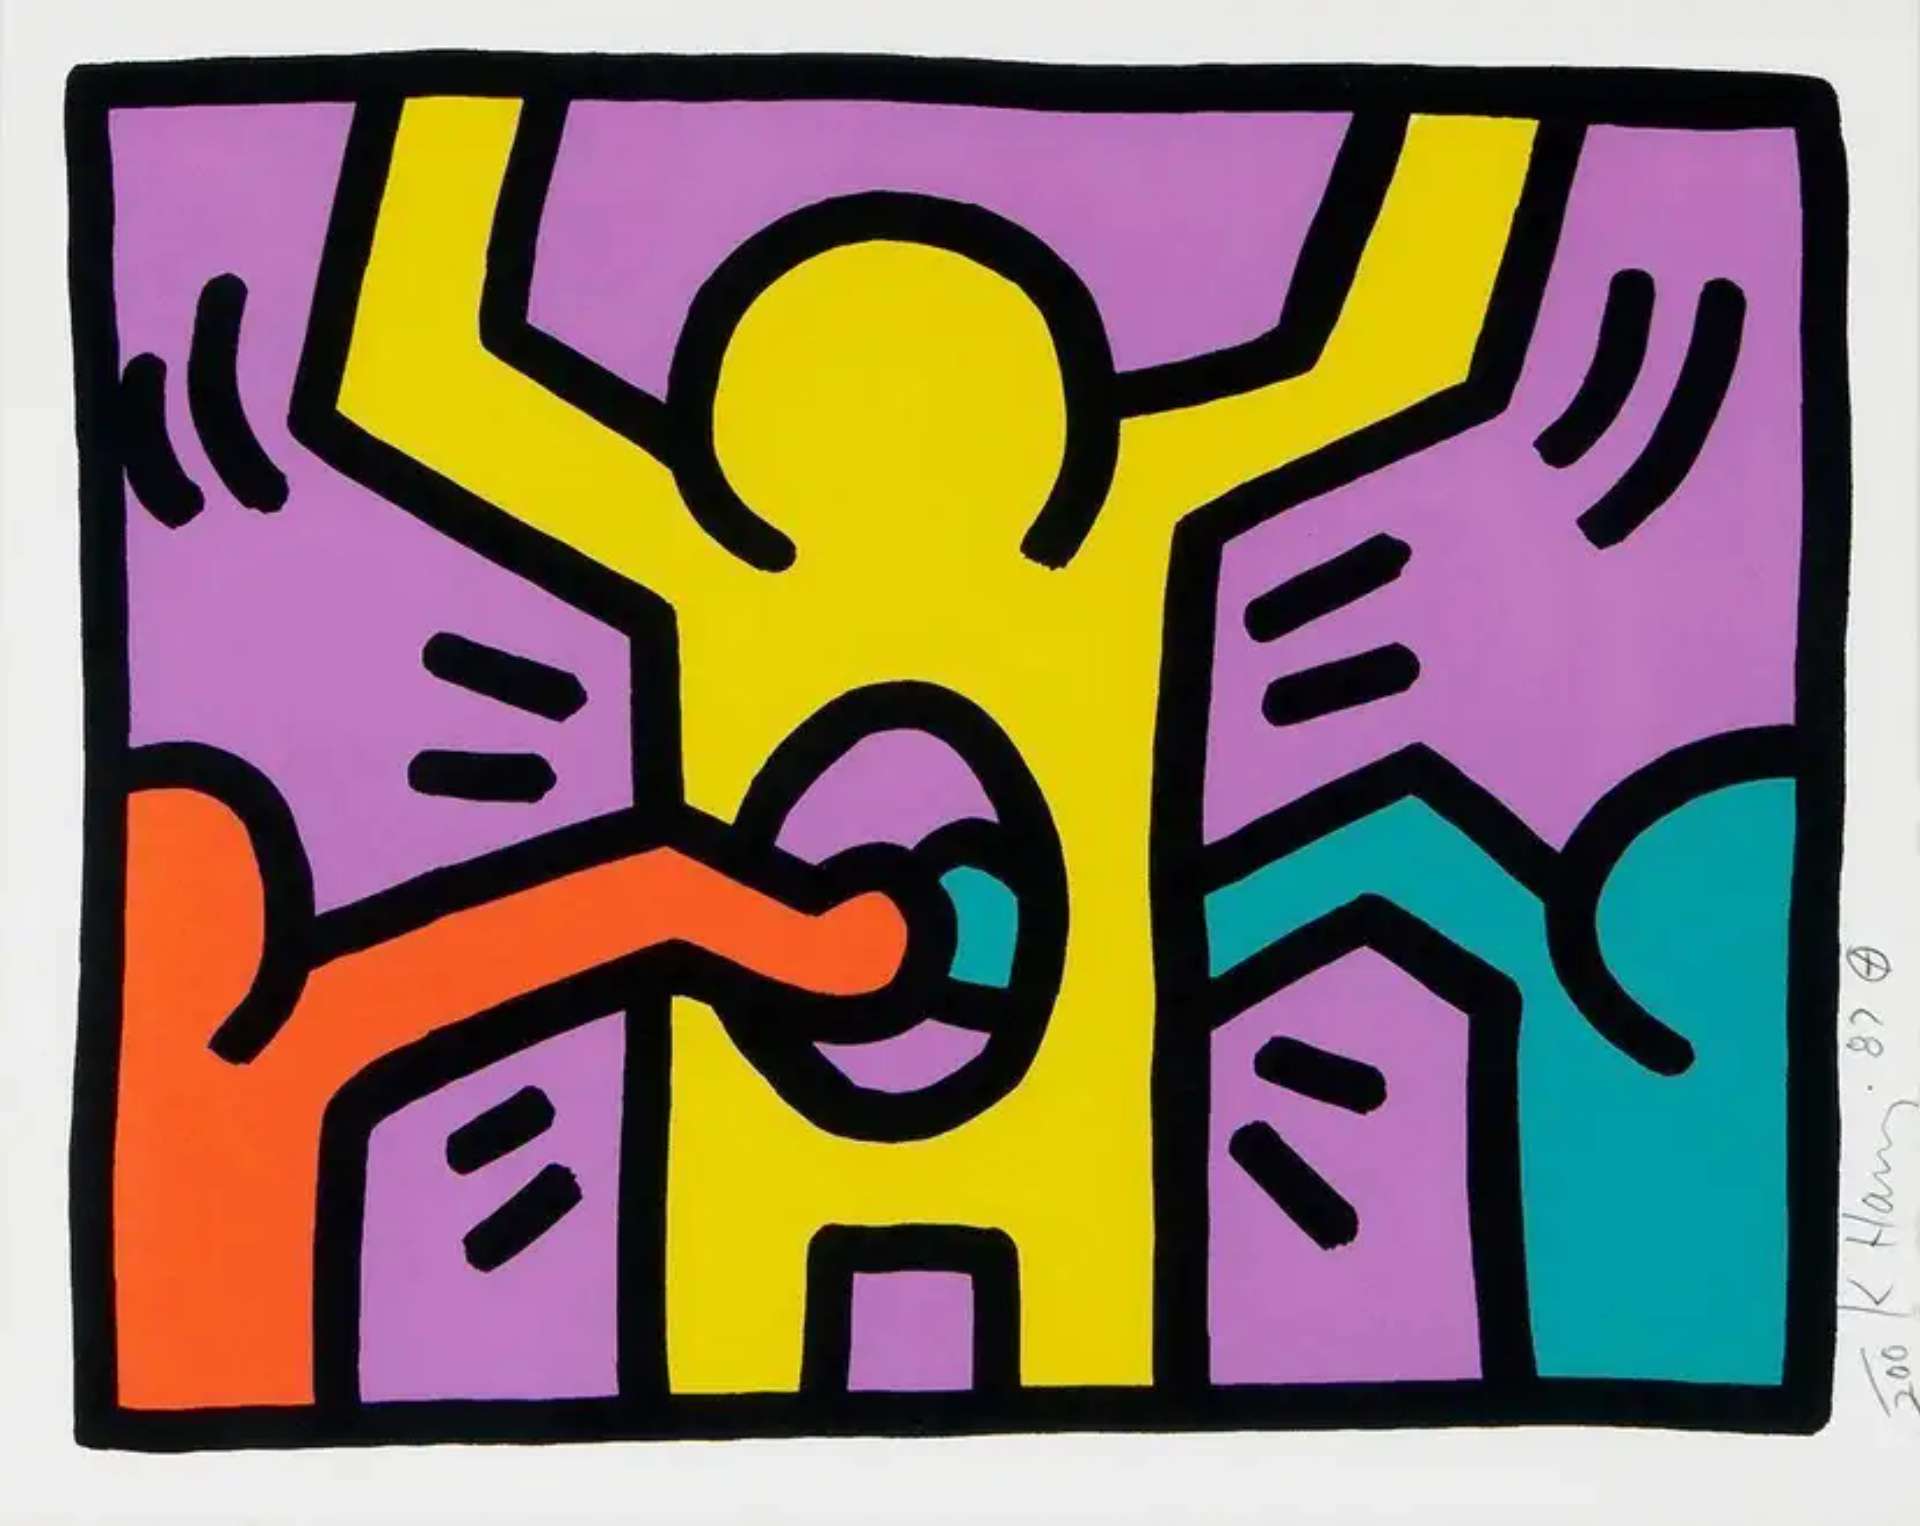 A screenprint by Keith Haring depicting two cartoon figures high-fiving through a hole in another figure's stomach